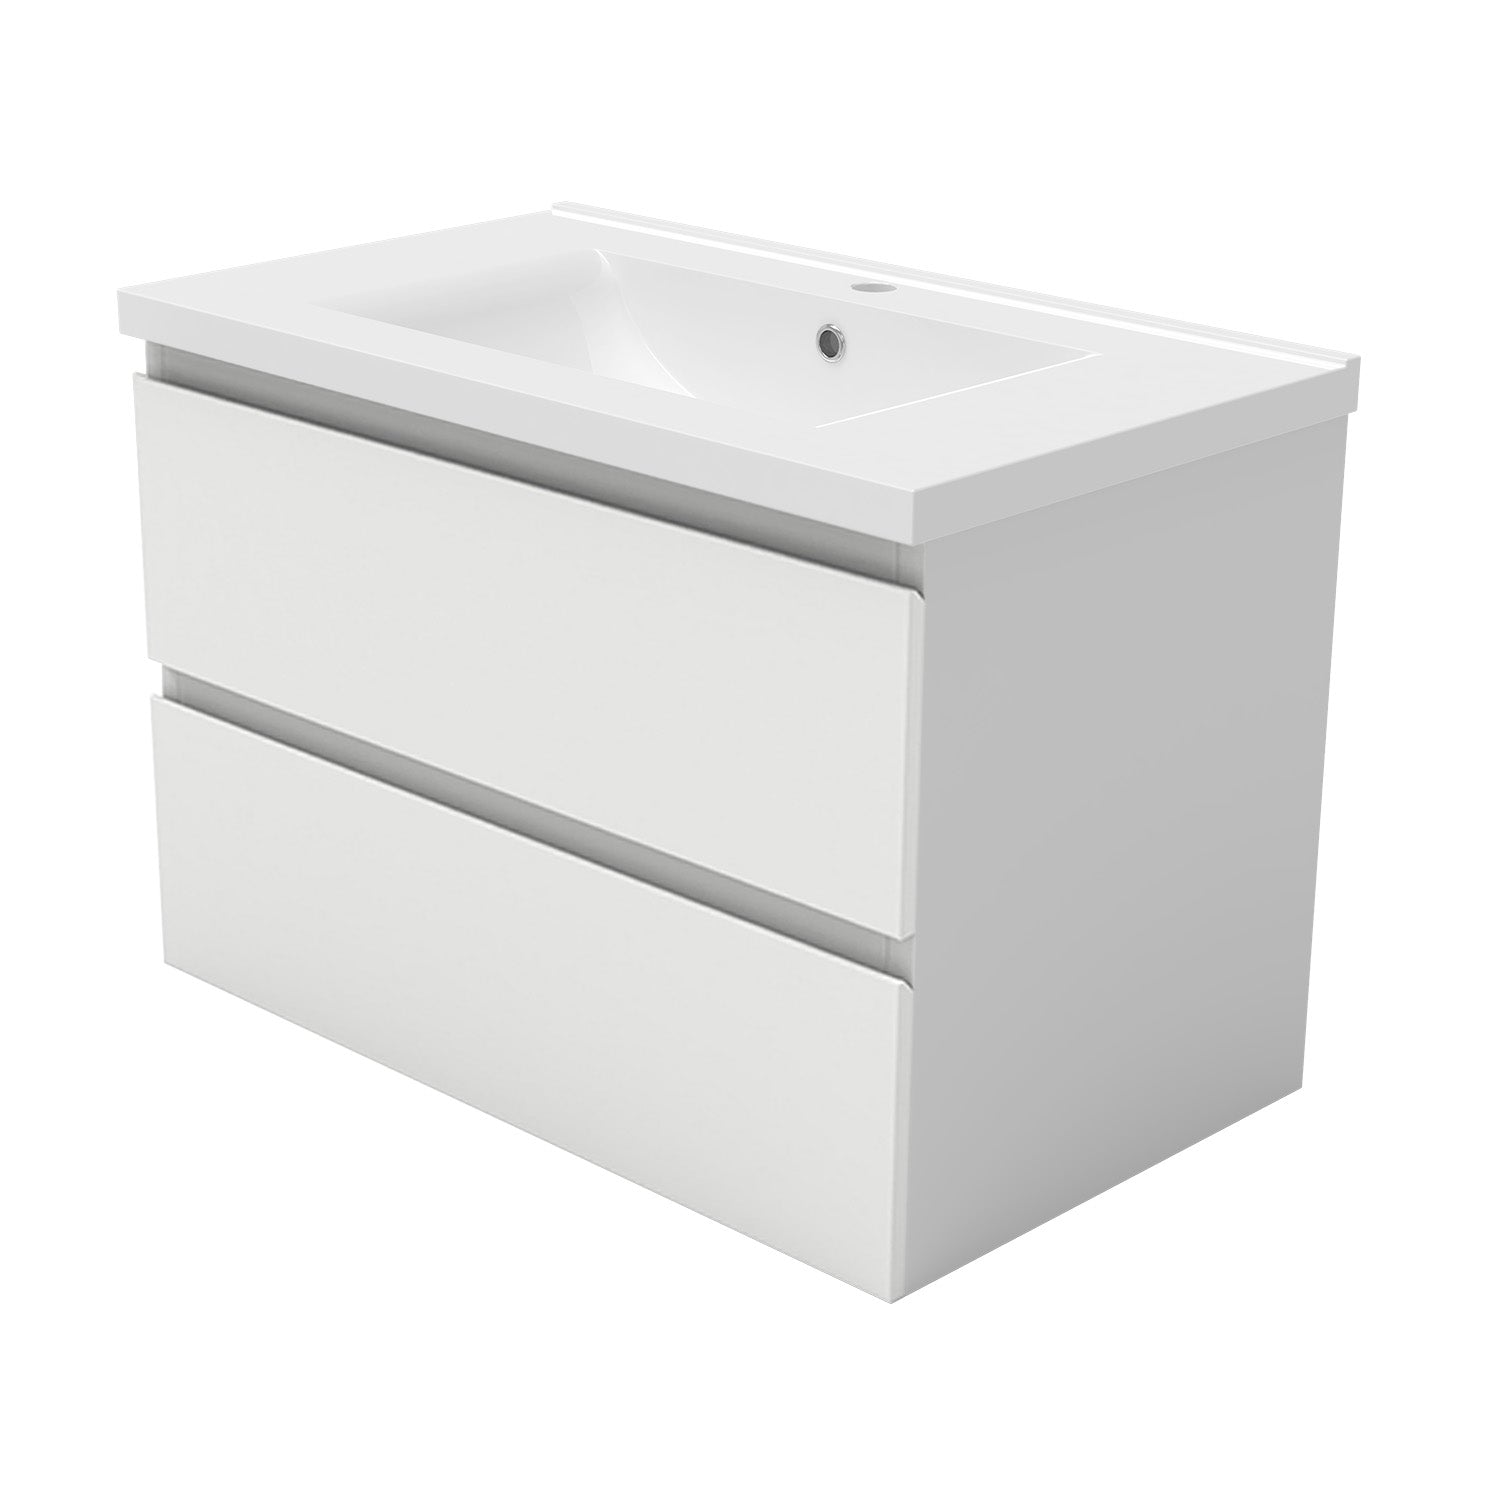 800mm Wide Wall Mounted Vanity Units and Sink 2 Drawers - Matt White